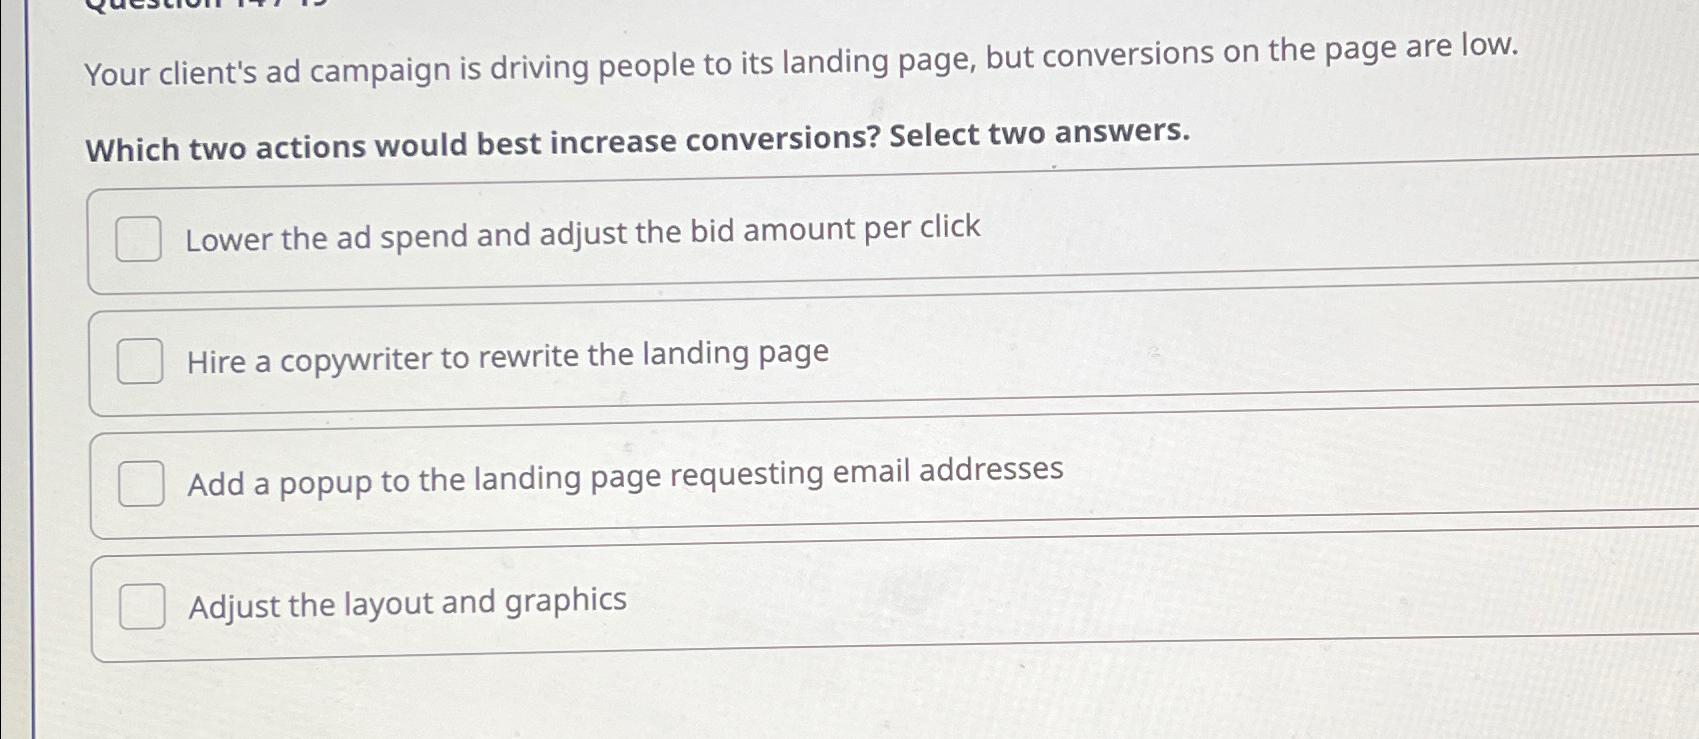 Your client's ad campaign is driving people to its landing page, but conversions on the page are low. Which